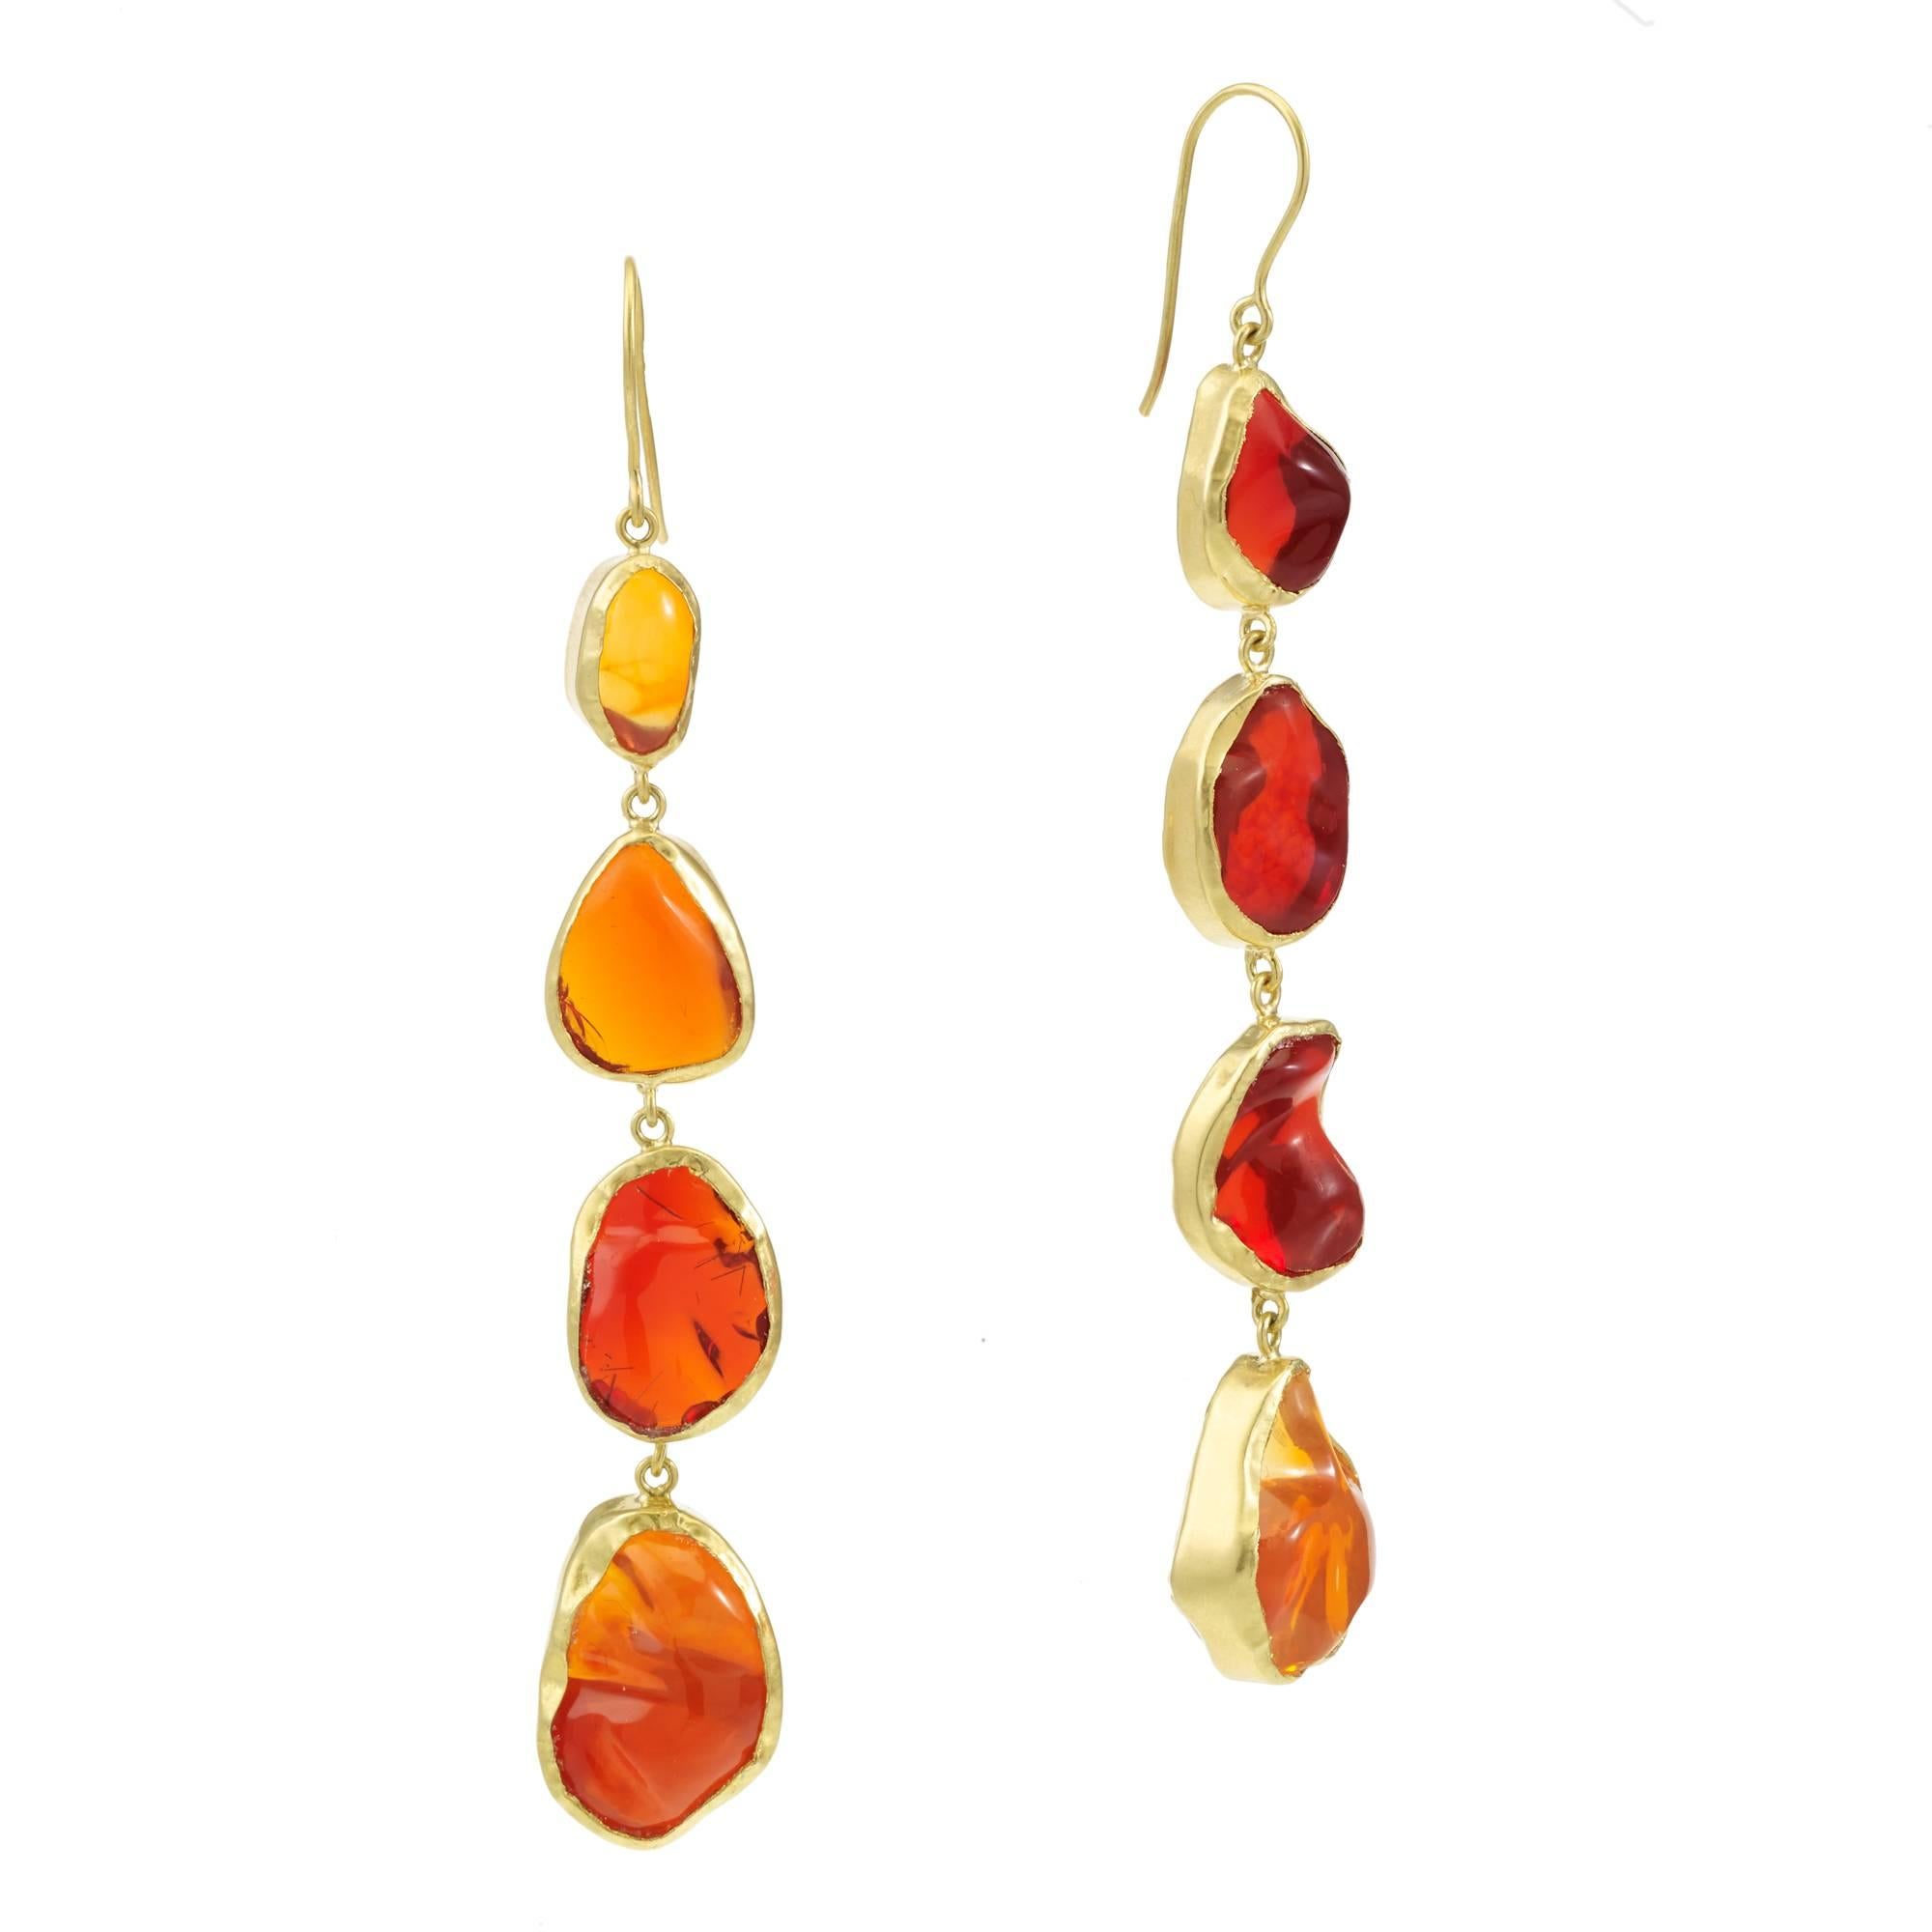 The beautiful ombre tones of Mexico’s finest Fire opal have been combined with Pippa’s love of nature and organic shapes to create an enchanting collection of fluid lines, tumbled pebbles and seductive, baroque pendants. Believed to have been